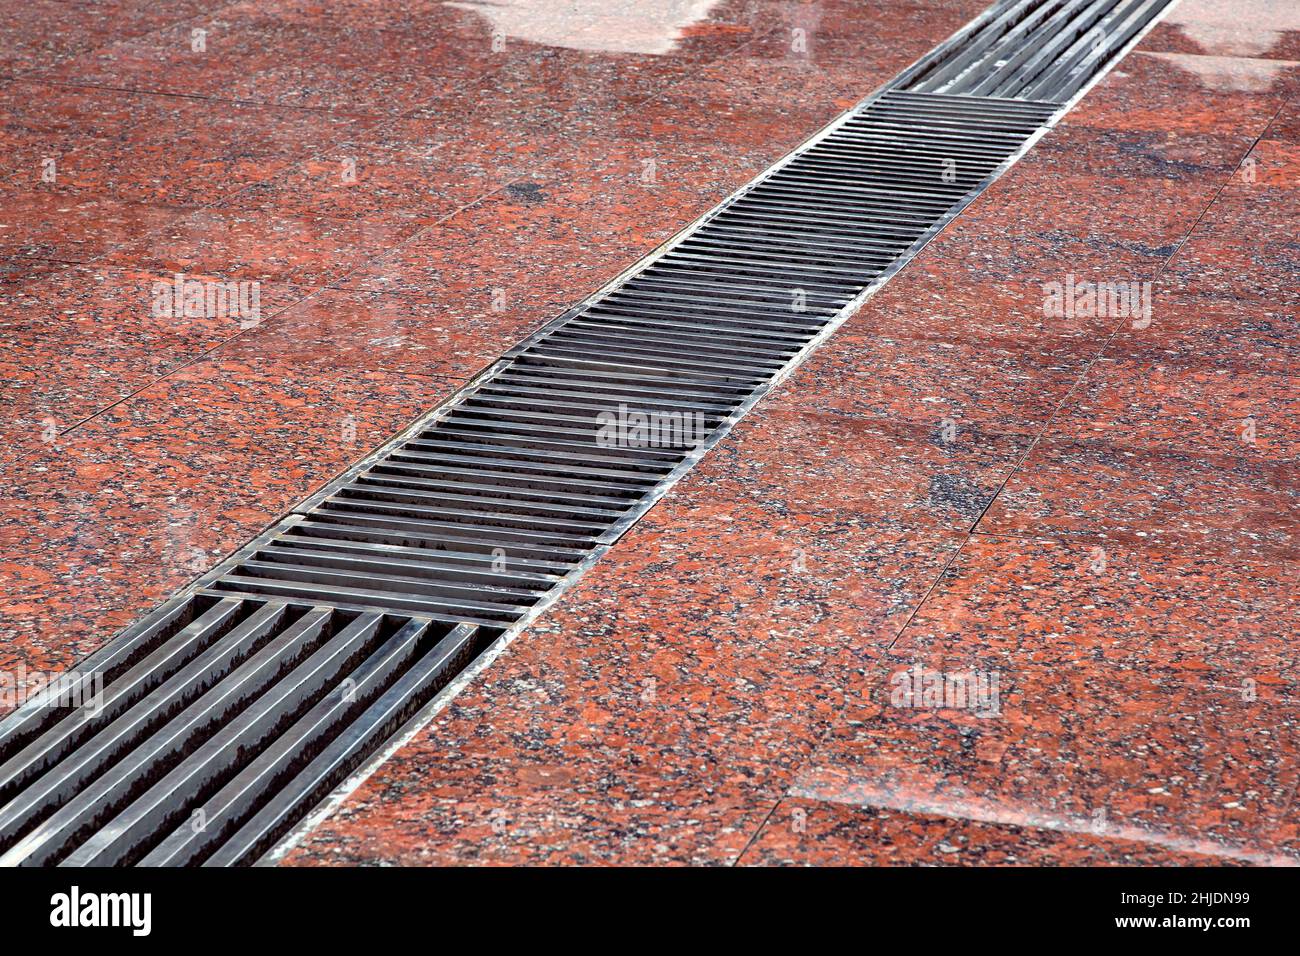 drainage grate with stripes on the floor with a wet red stone granite surface, close-up of a storm system wet after rain. Stock Photo